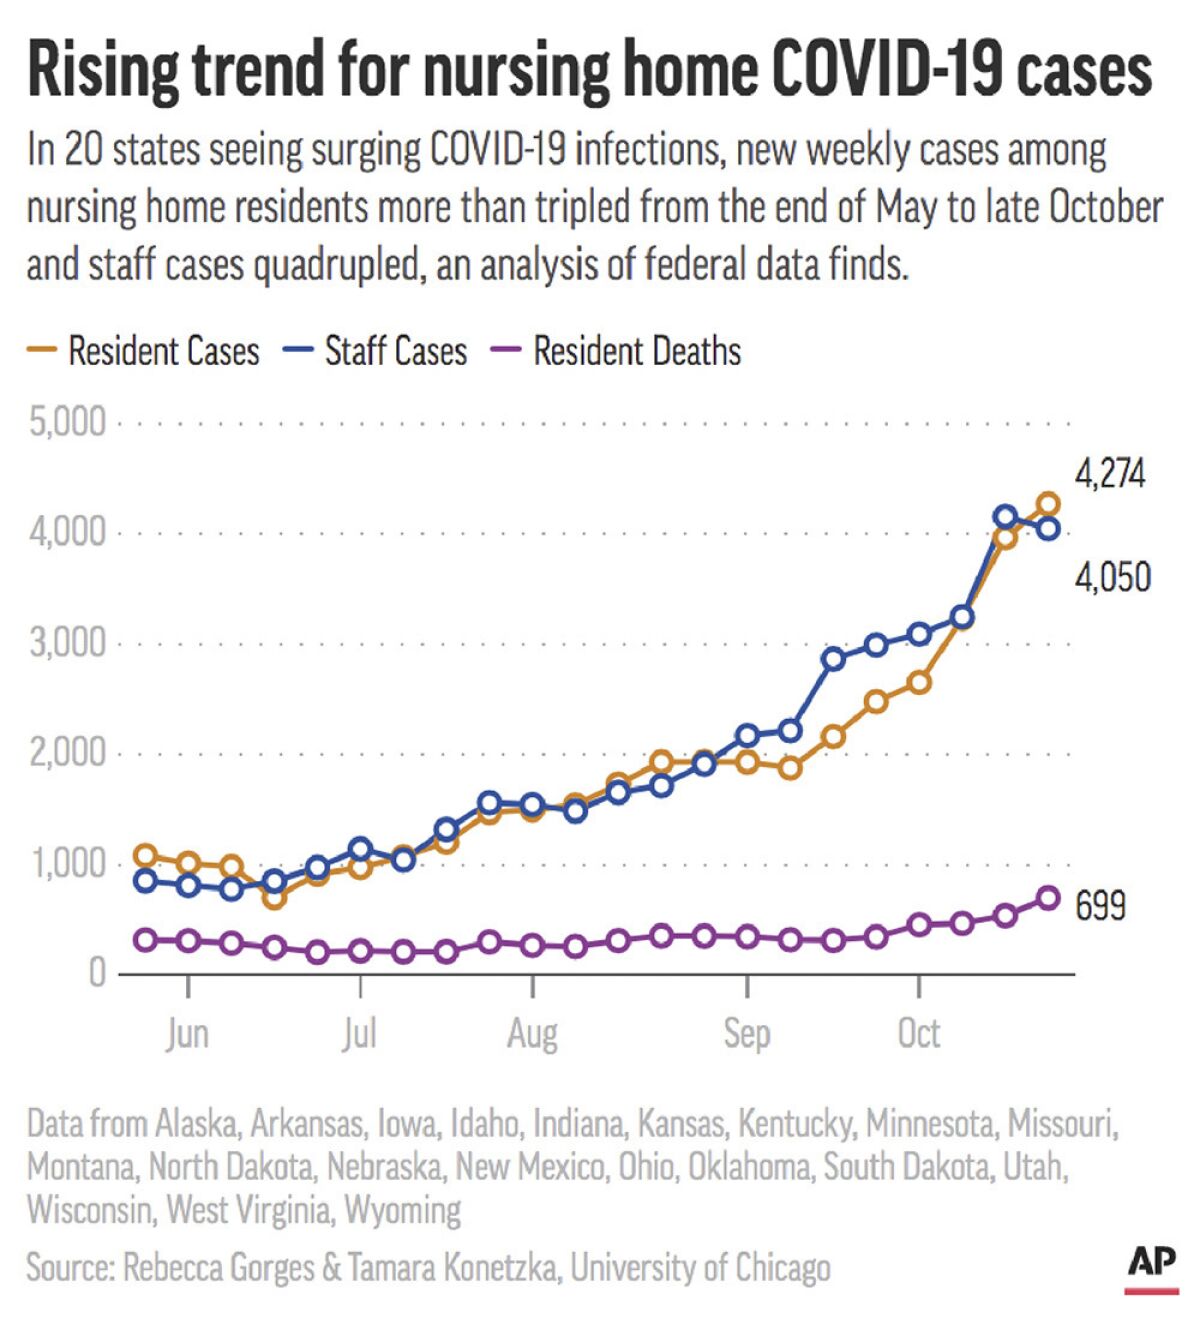 Weekly COVID-19 infections in nursing homes in 20 states have been rising since May.